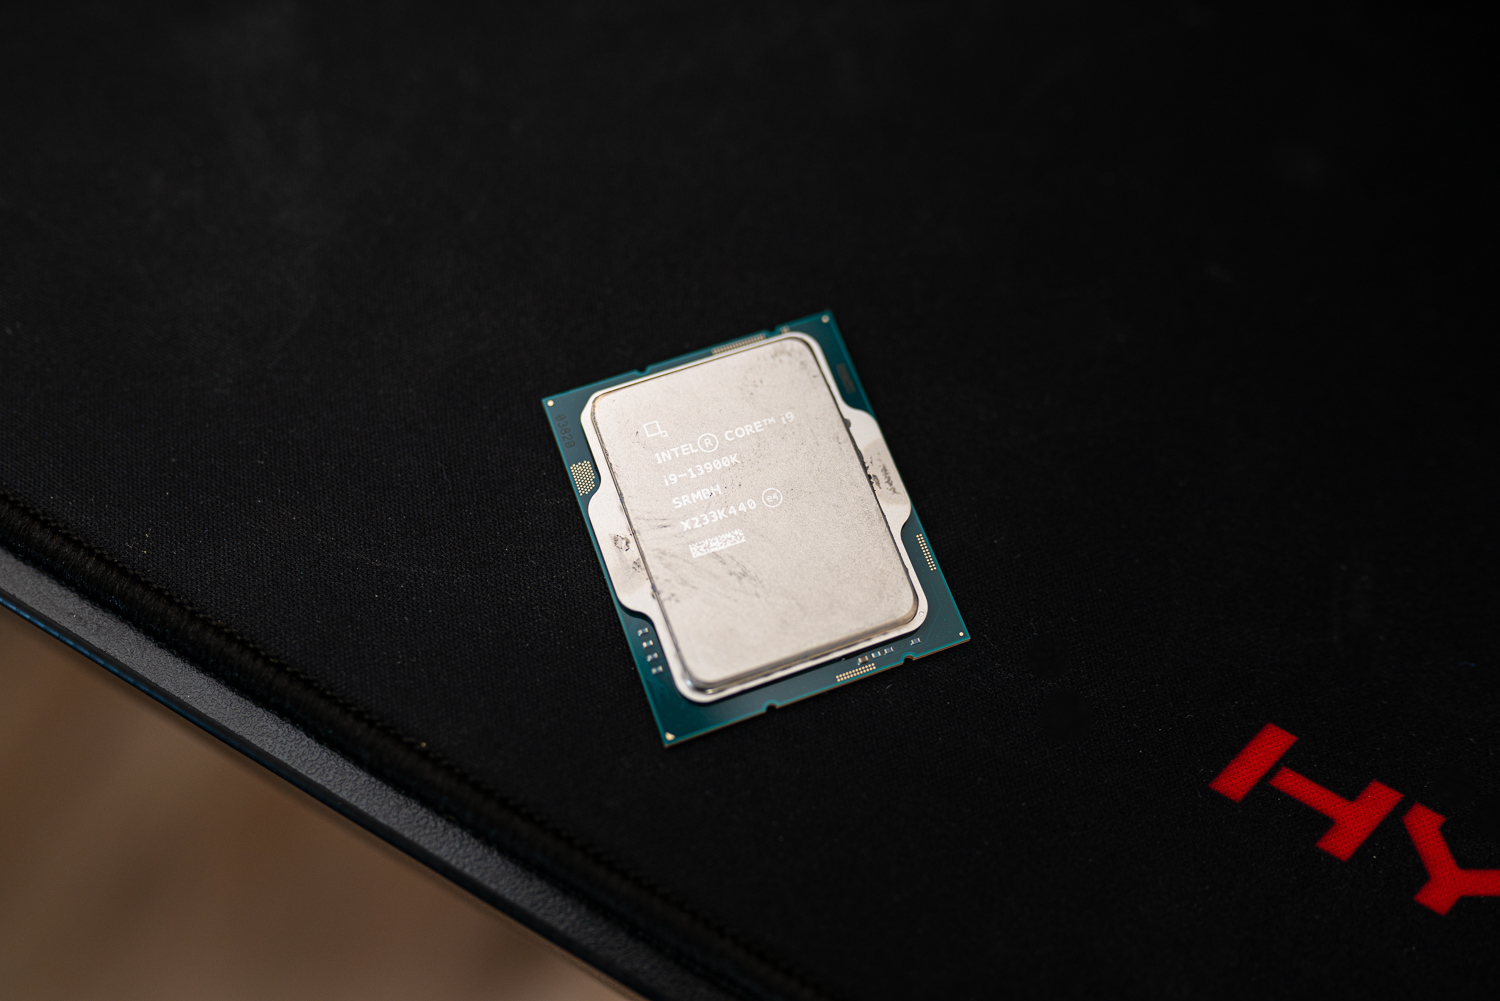 I’ve used Intel CPUs for years. Here’s why I’m finally switching to AMD